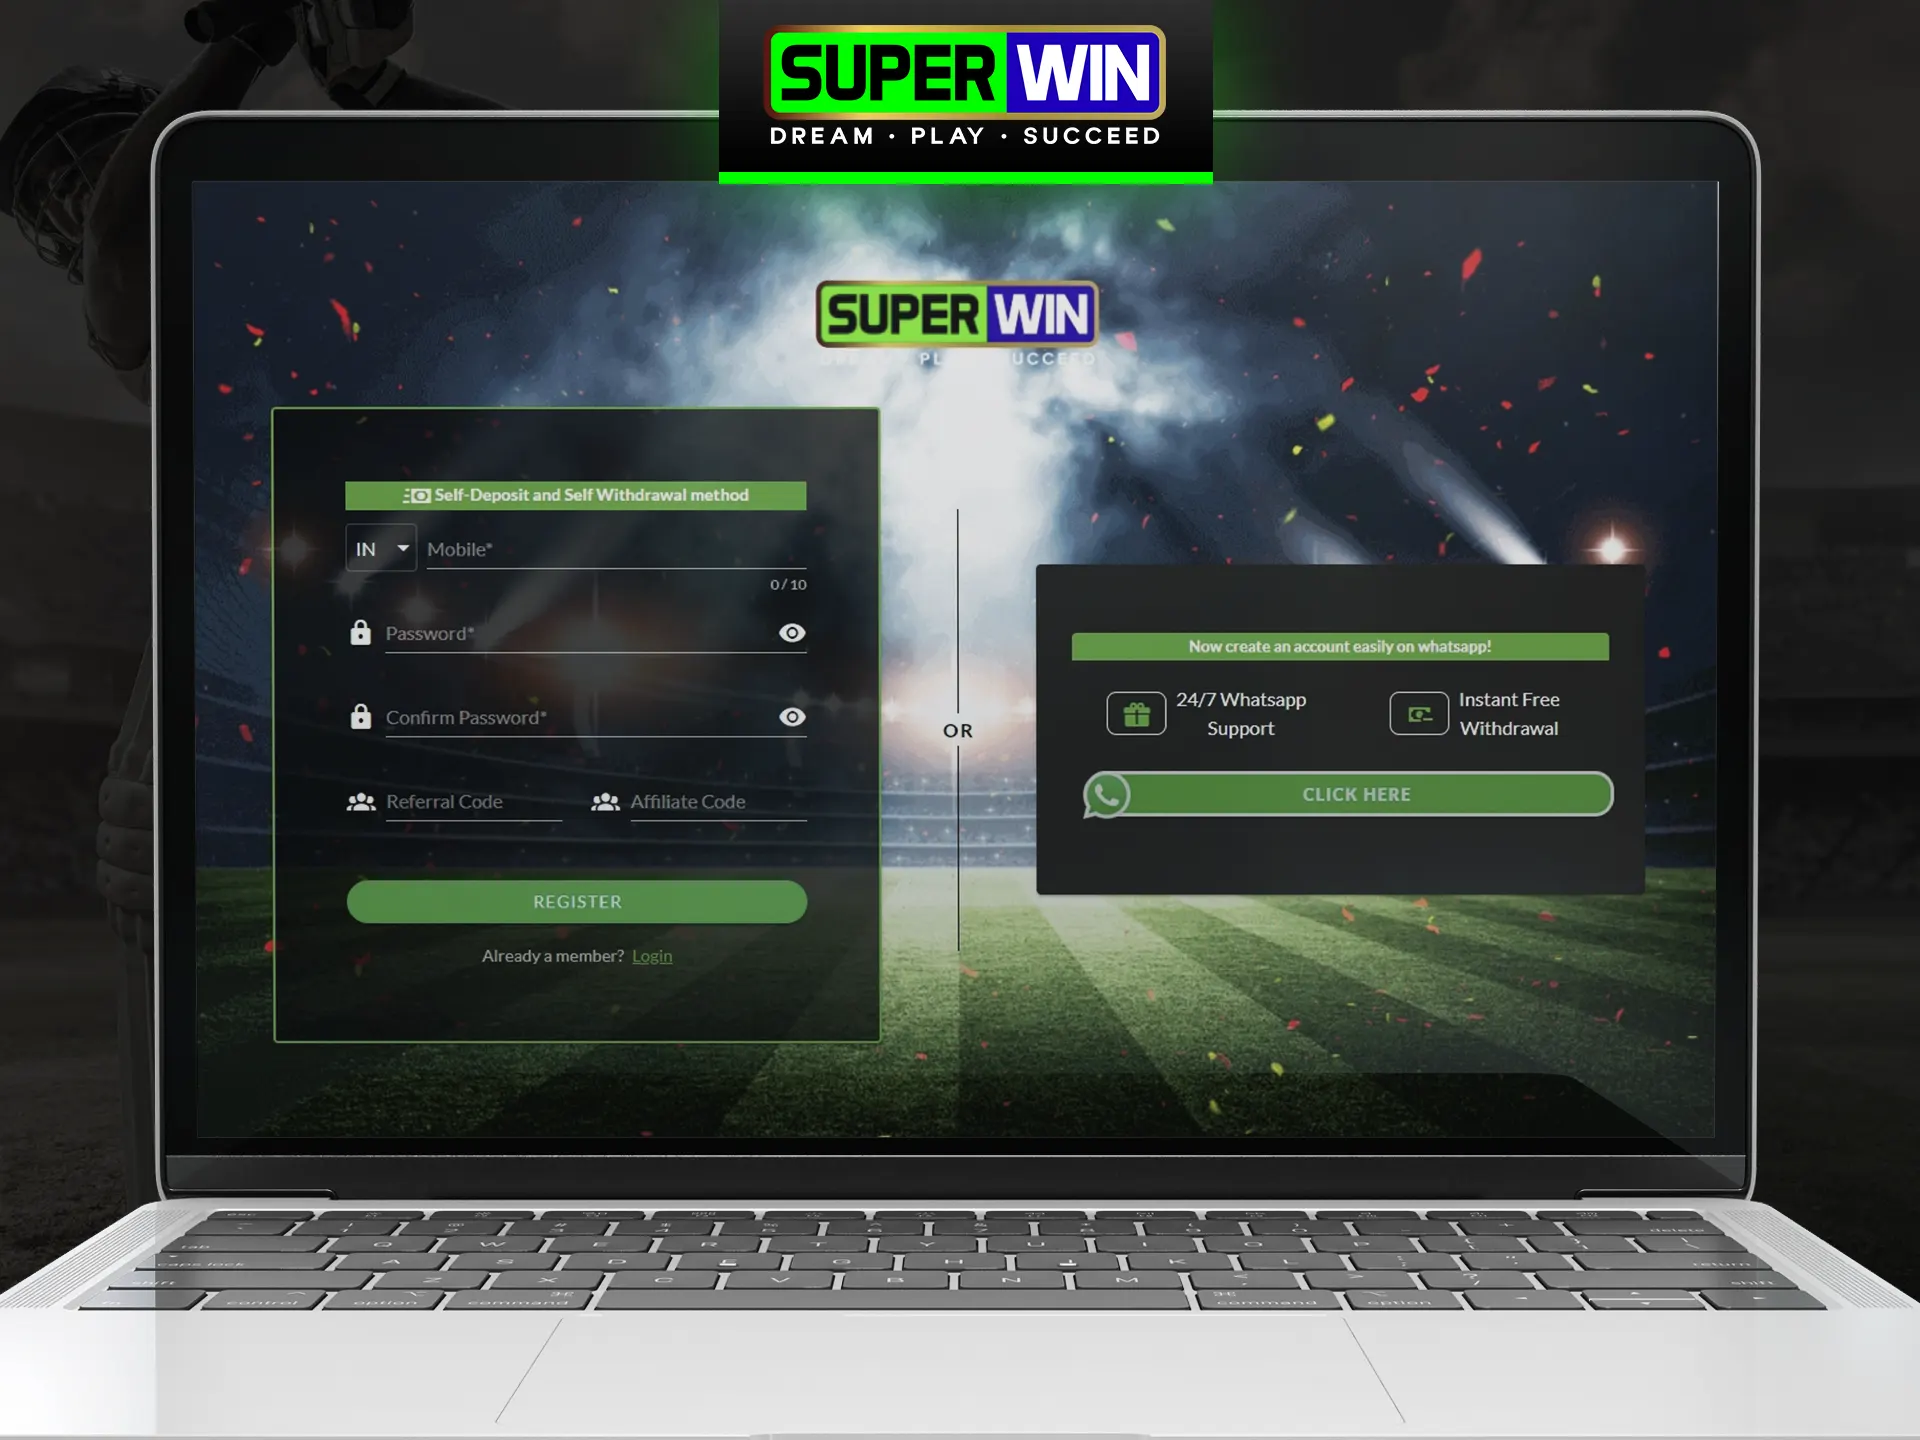 Go through a simple registration on Superwin.